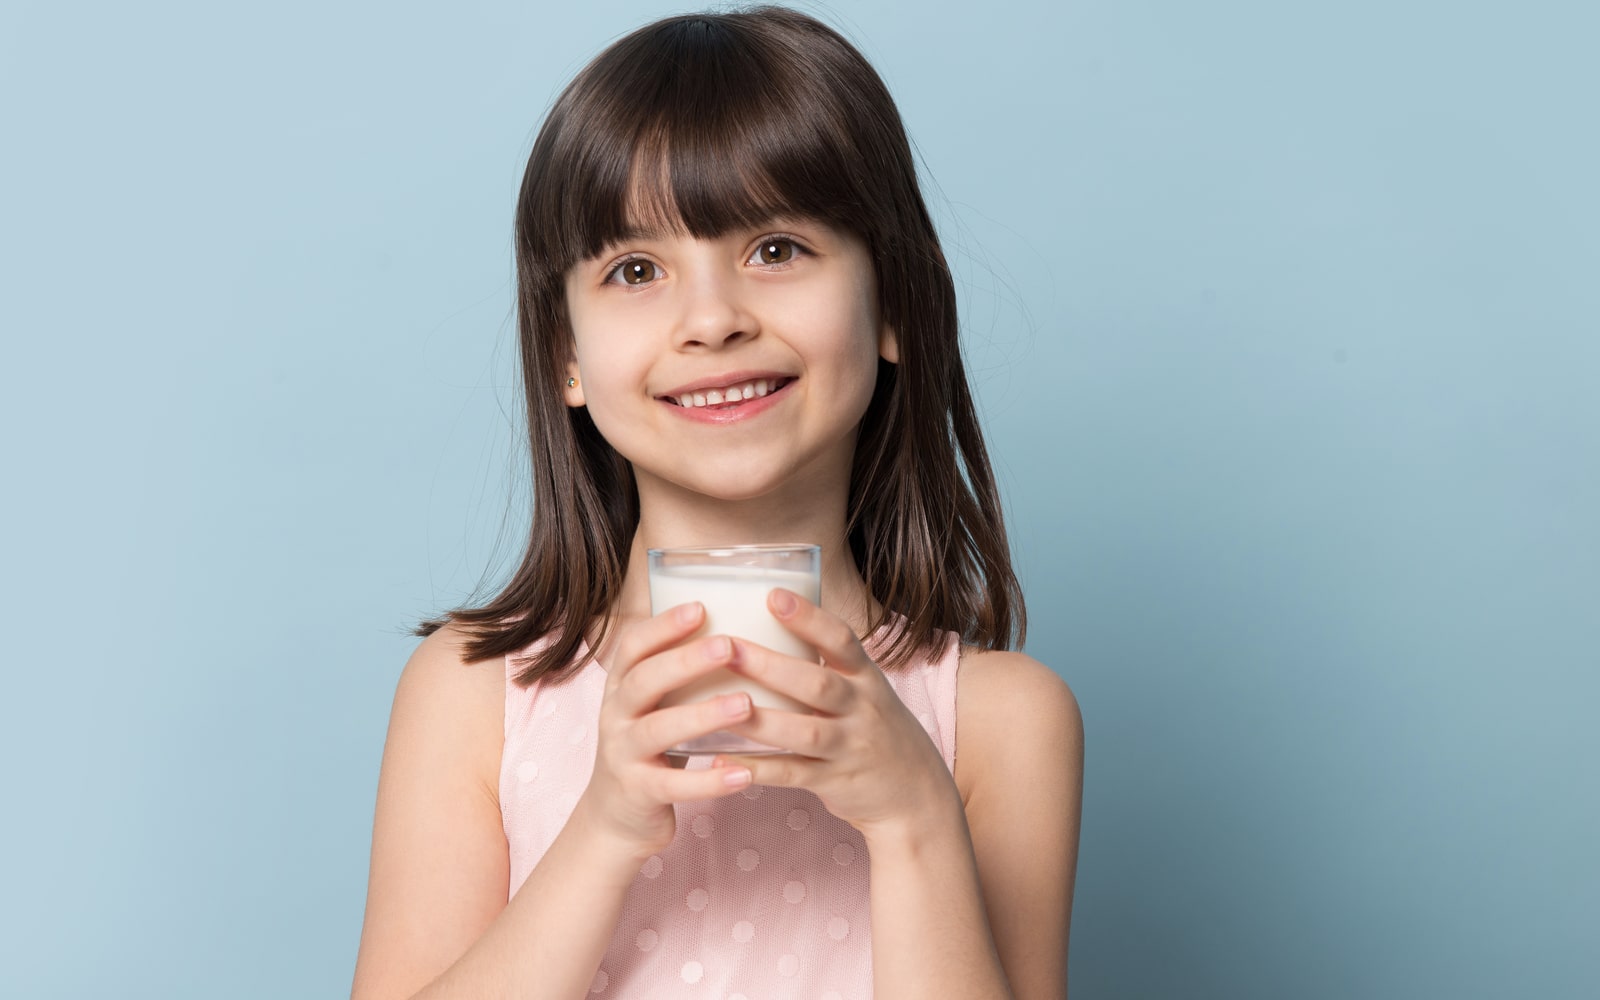 periodontal disease The Fascinating Way Vitamin D Protects Your Gums Smiling child holding glass of milk Dental Solutions of Mississippi dentist in Canton MS Dr. Ruth Roach Morgan Dr. Jessica Morgan